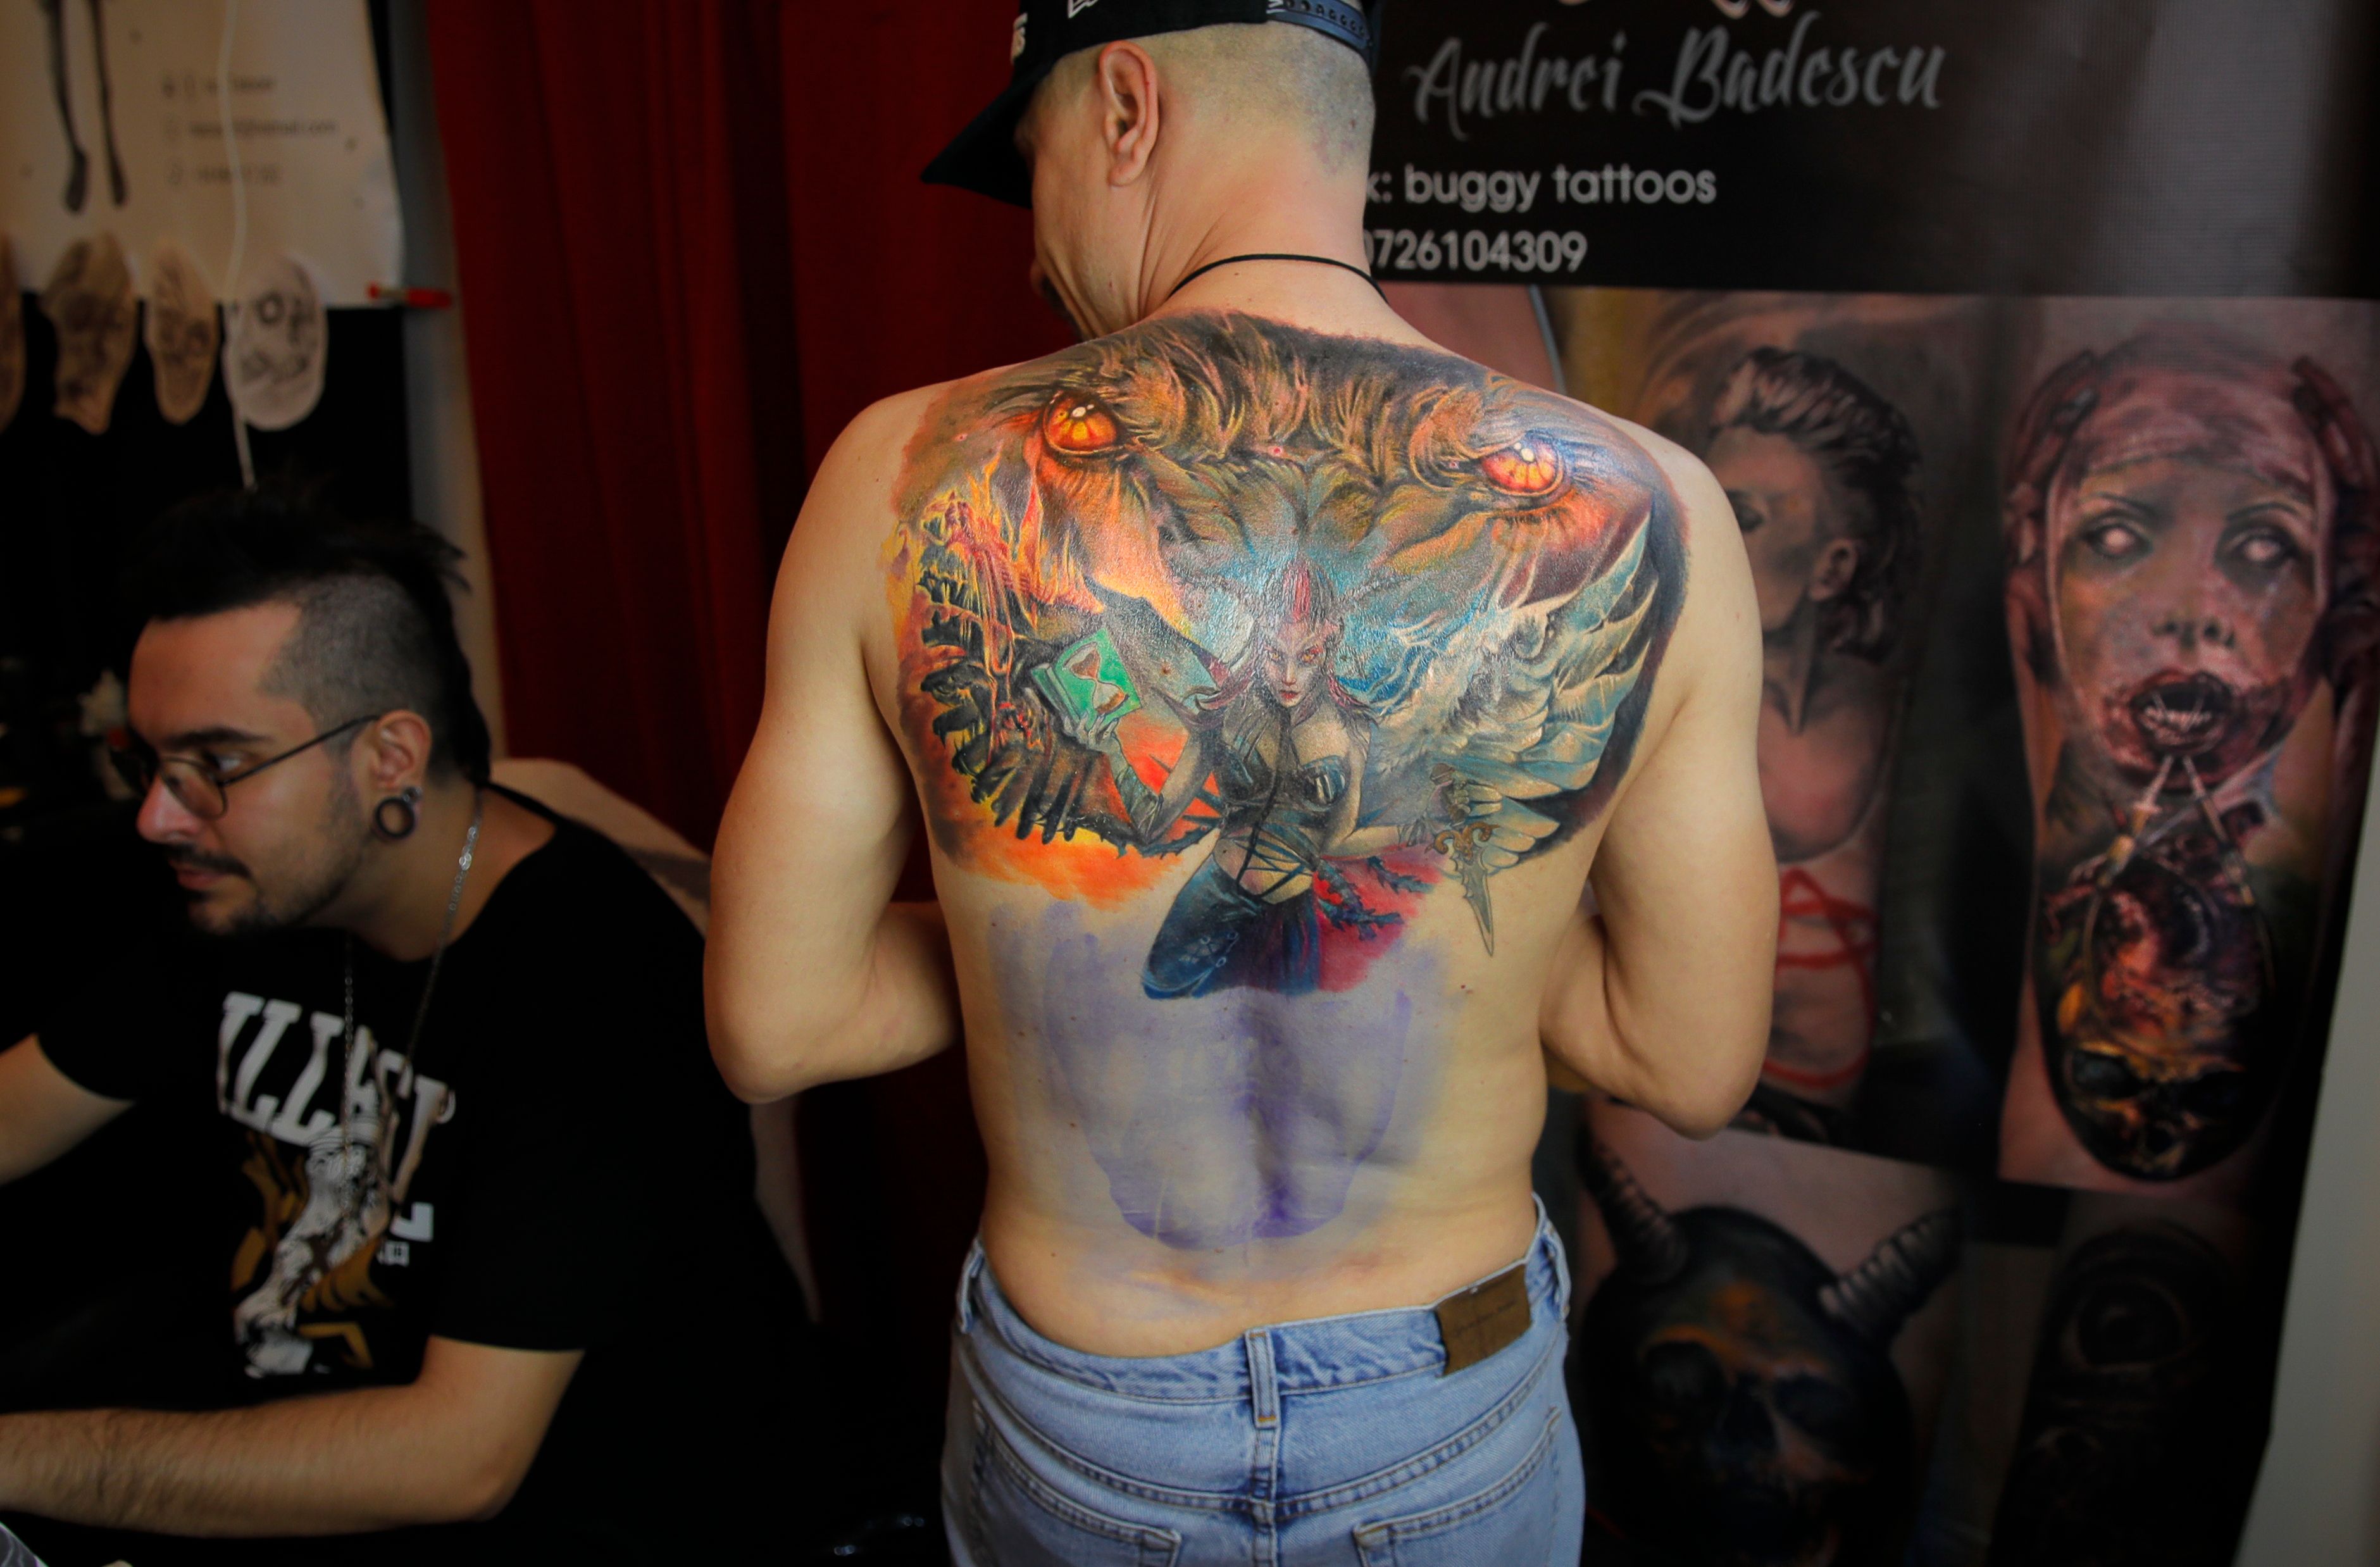 SGN  Queering the tattoo industry A visit to the Seattle Tattoo Expo